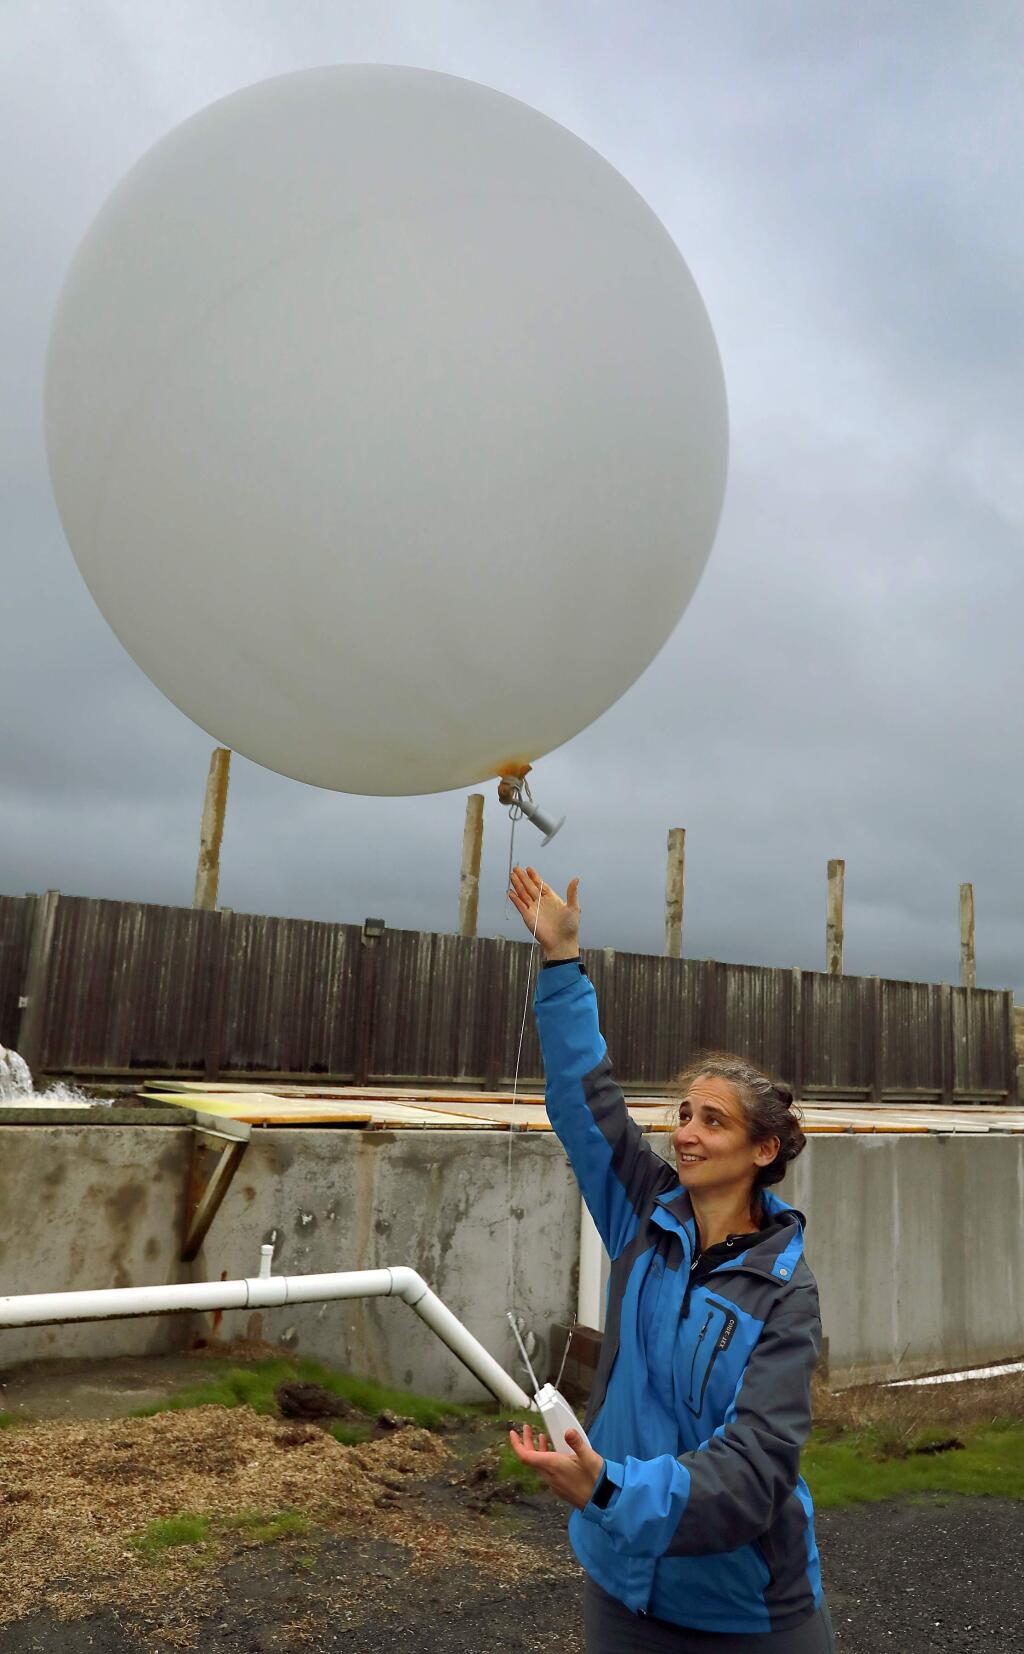 Anna Wilson, with the Scripps Institution of Oceanography, releases a weather balloon to study atmospheric rivers in the region. The balloon was released Sunday at 4 p.m. at the Bodega Marine Labs at the same time as another was released near Lake Mendocino in Ukiah. (John Burgess/The Press Democrat)